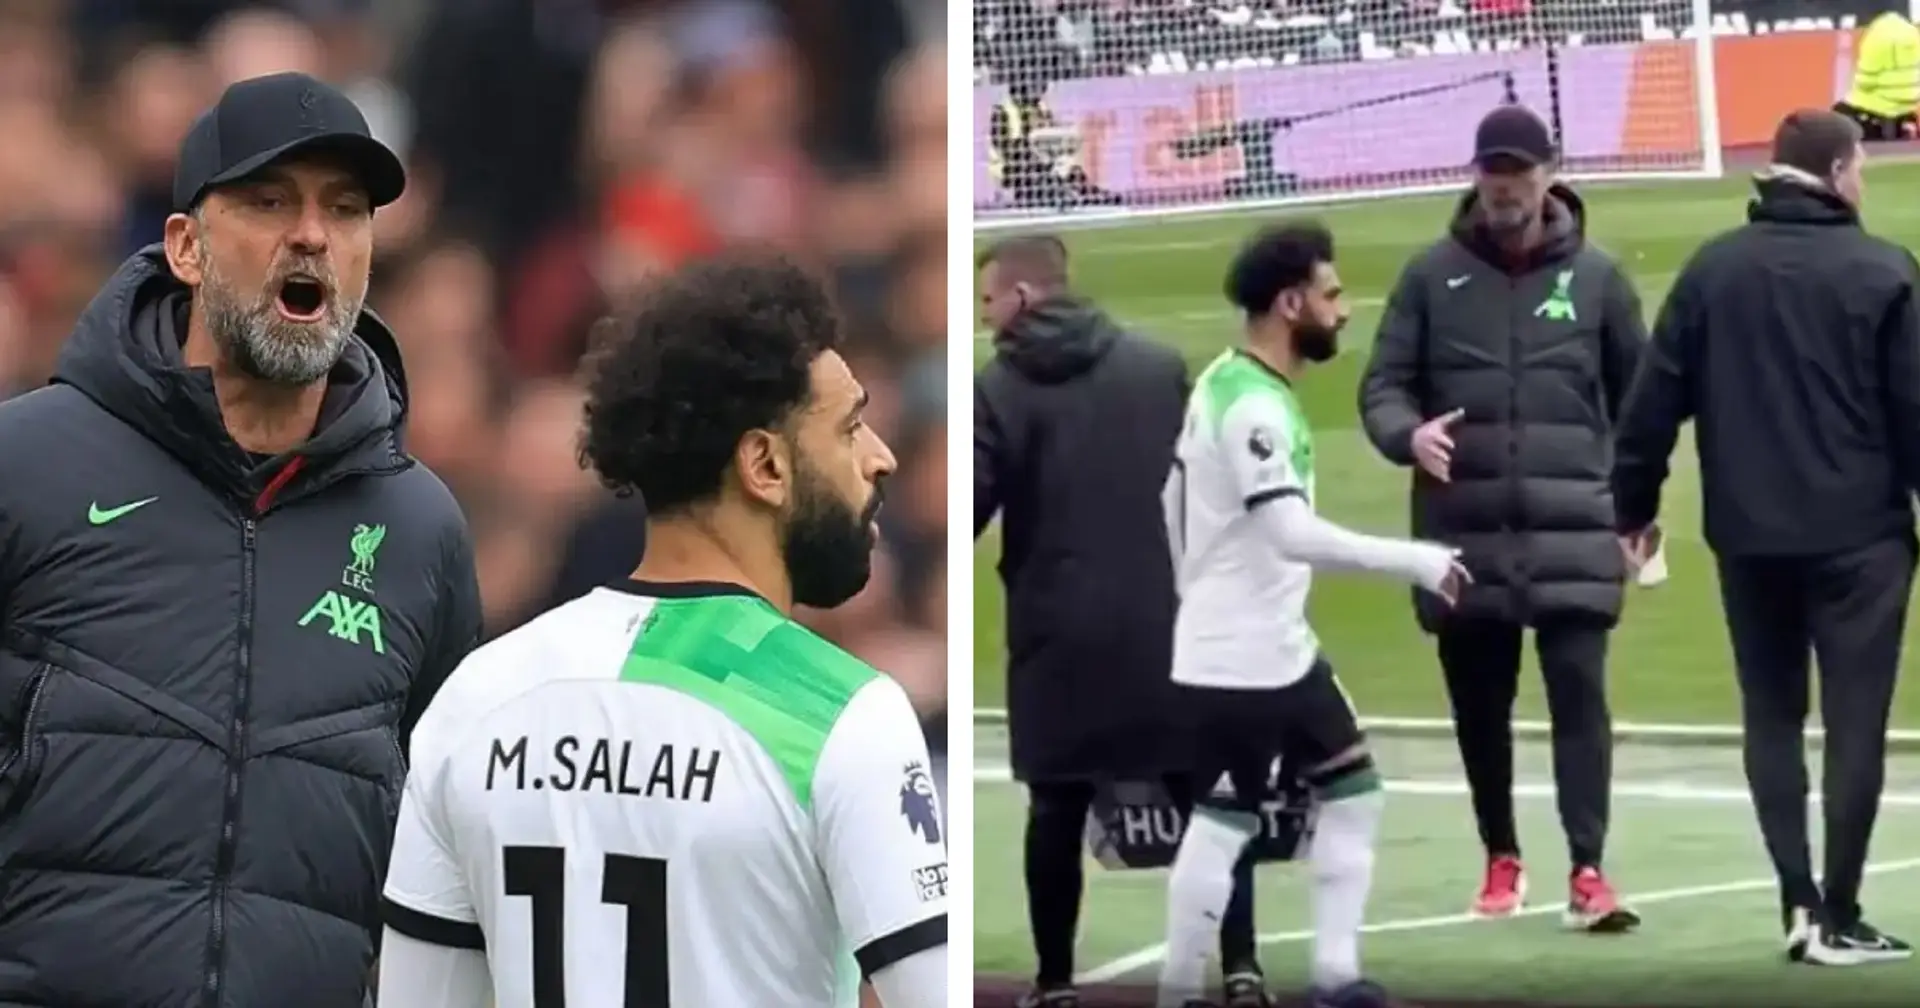 Spotted: Alternate angle of Salah vs Klopp spat shows manager threatening to send him back to the bench